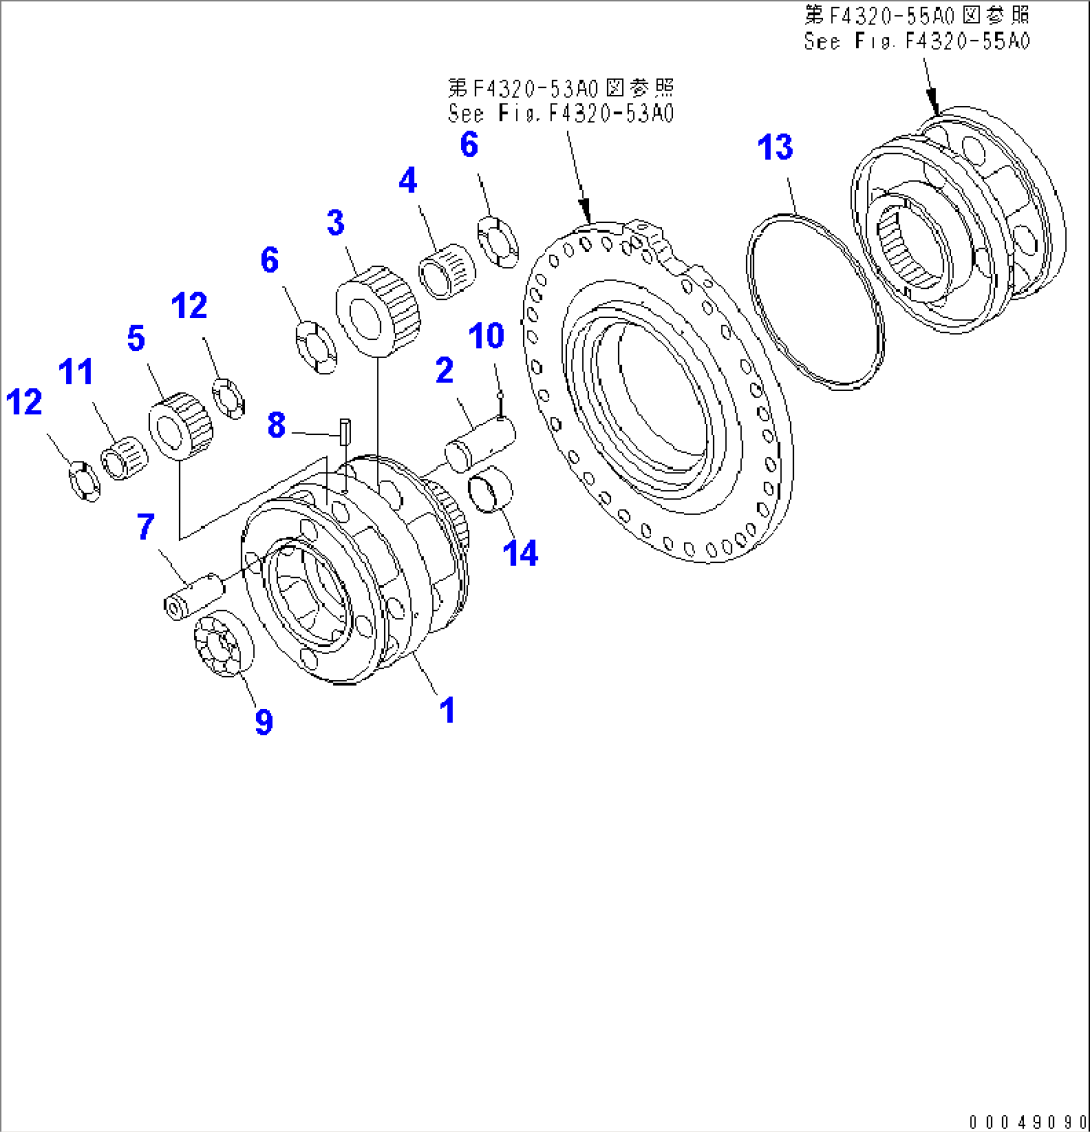 TRANSMISSION (4TH AND 3RD CARRIER)(#55001-)